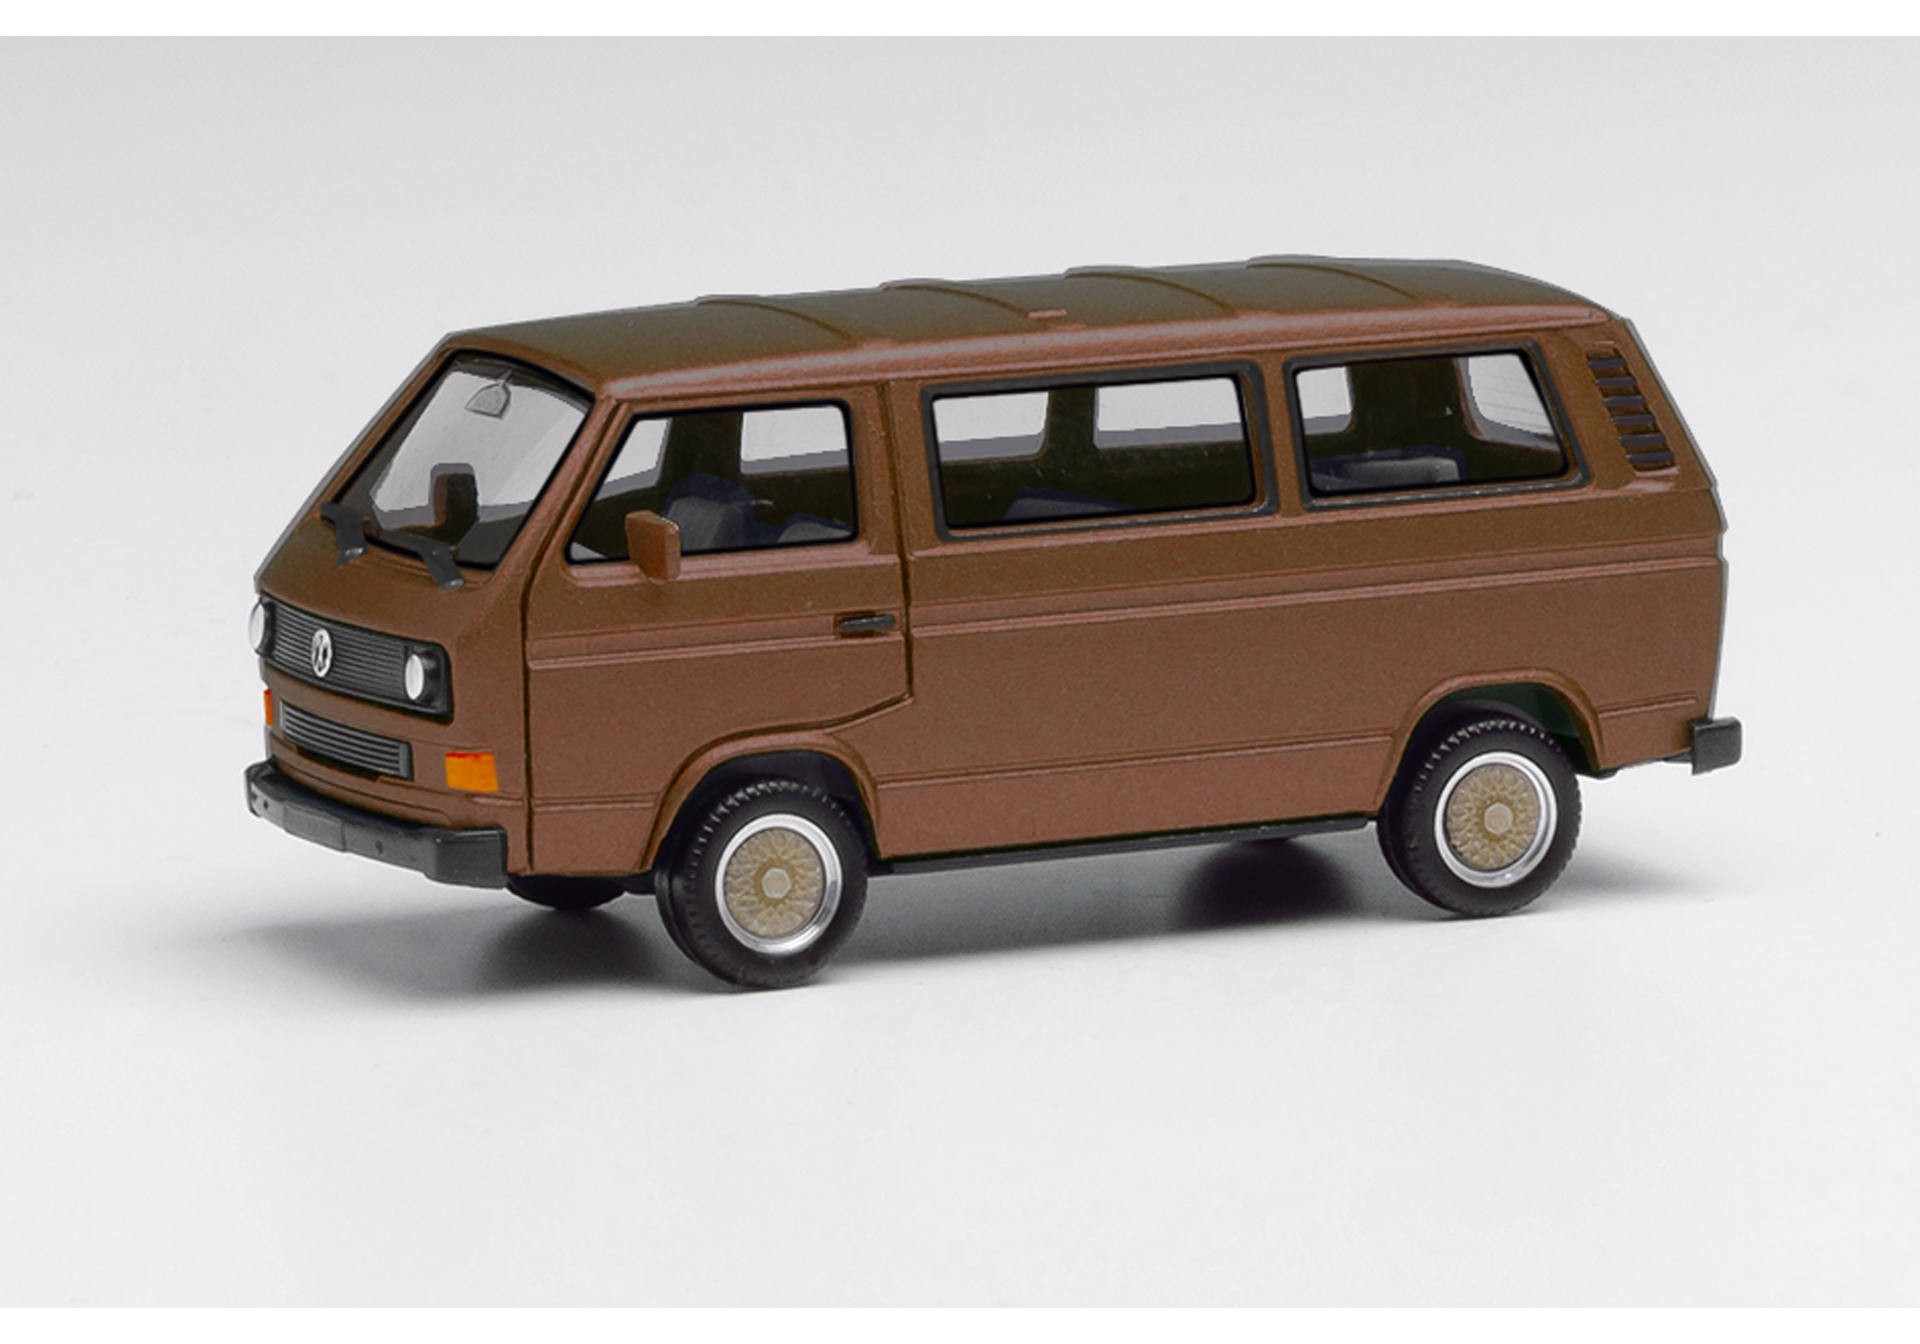 Herpa 430876-002 VW T3 Bus with BBS Rims Model H0 1:87